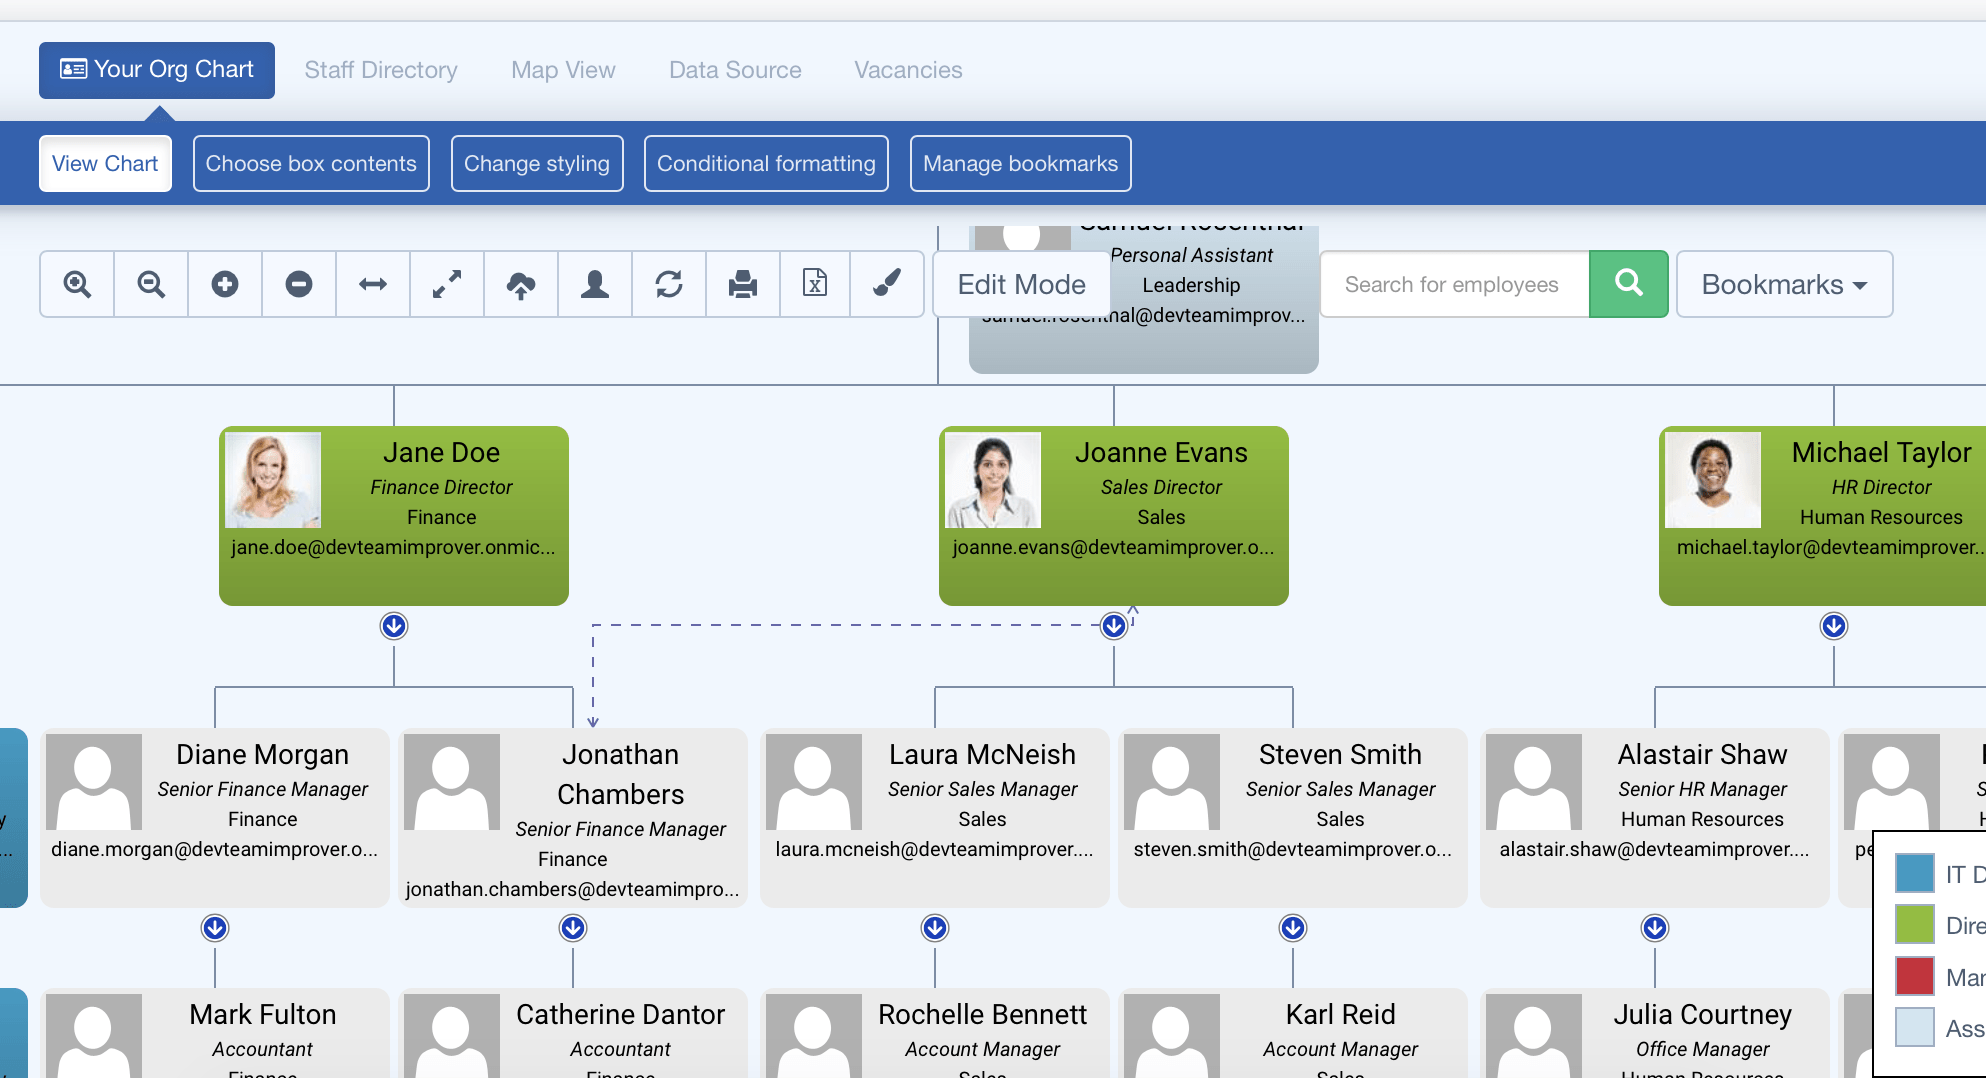 How To Add A Dotted Line In Word Org Chart